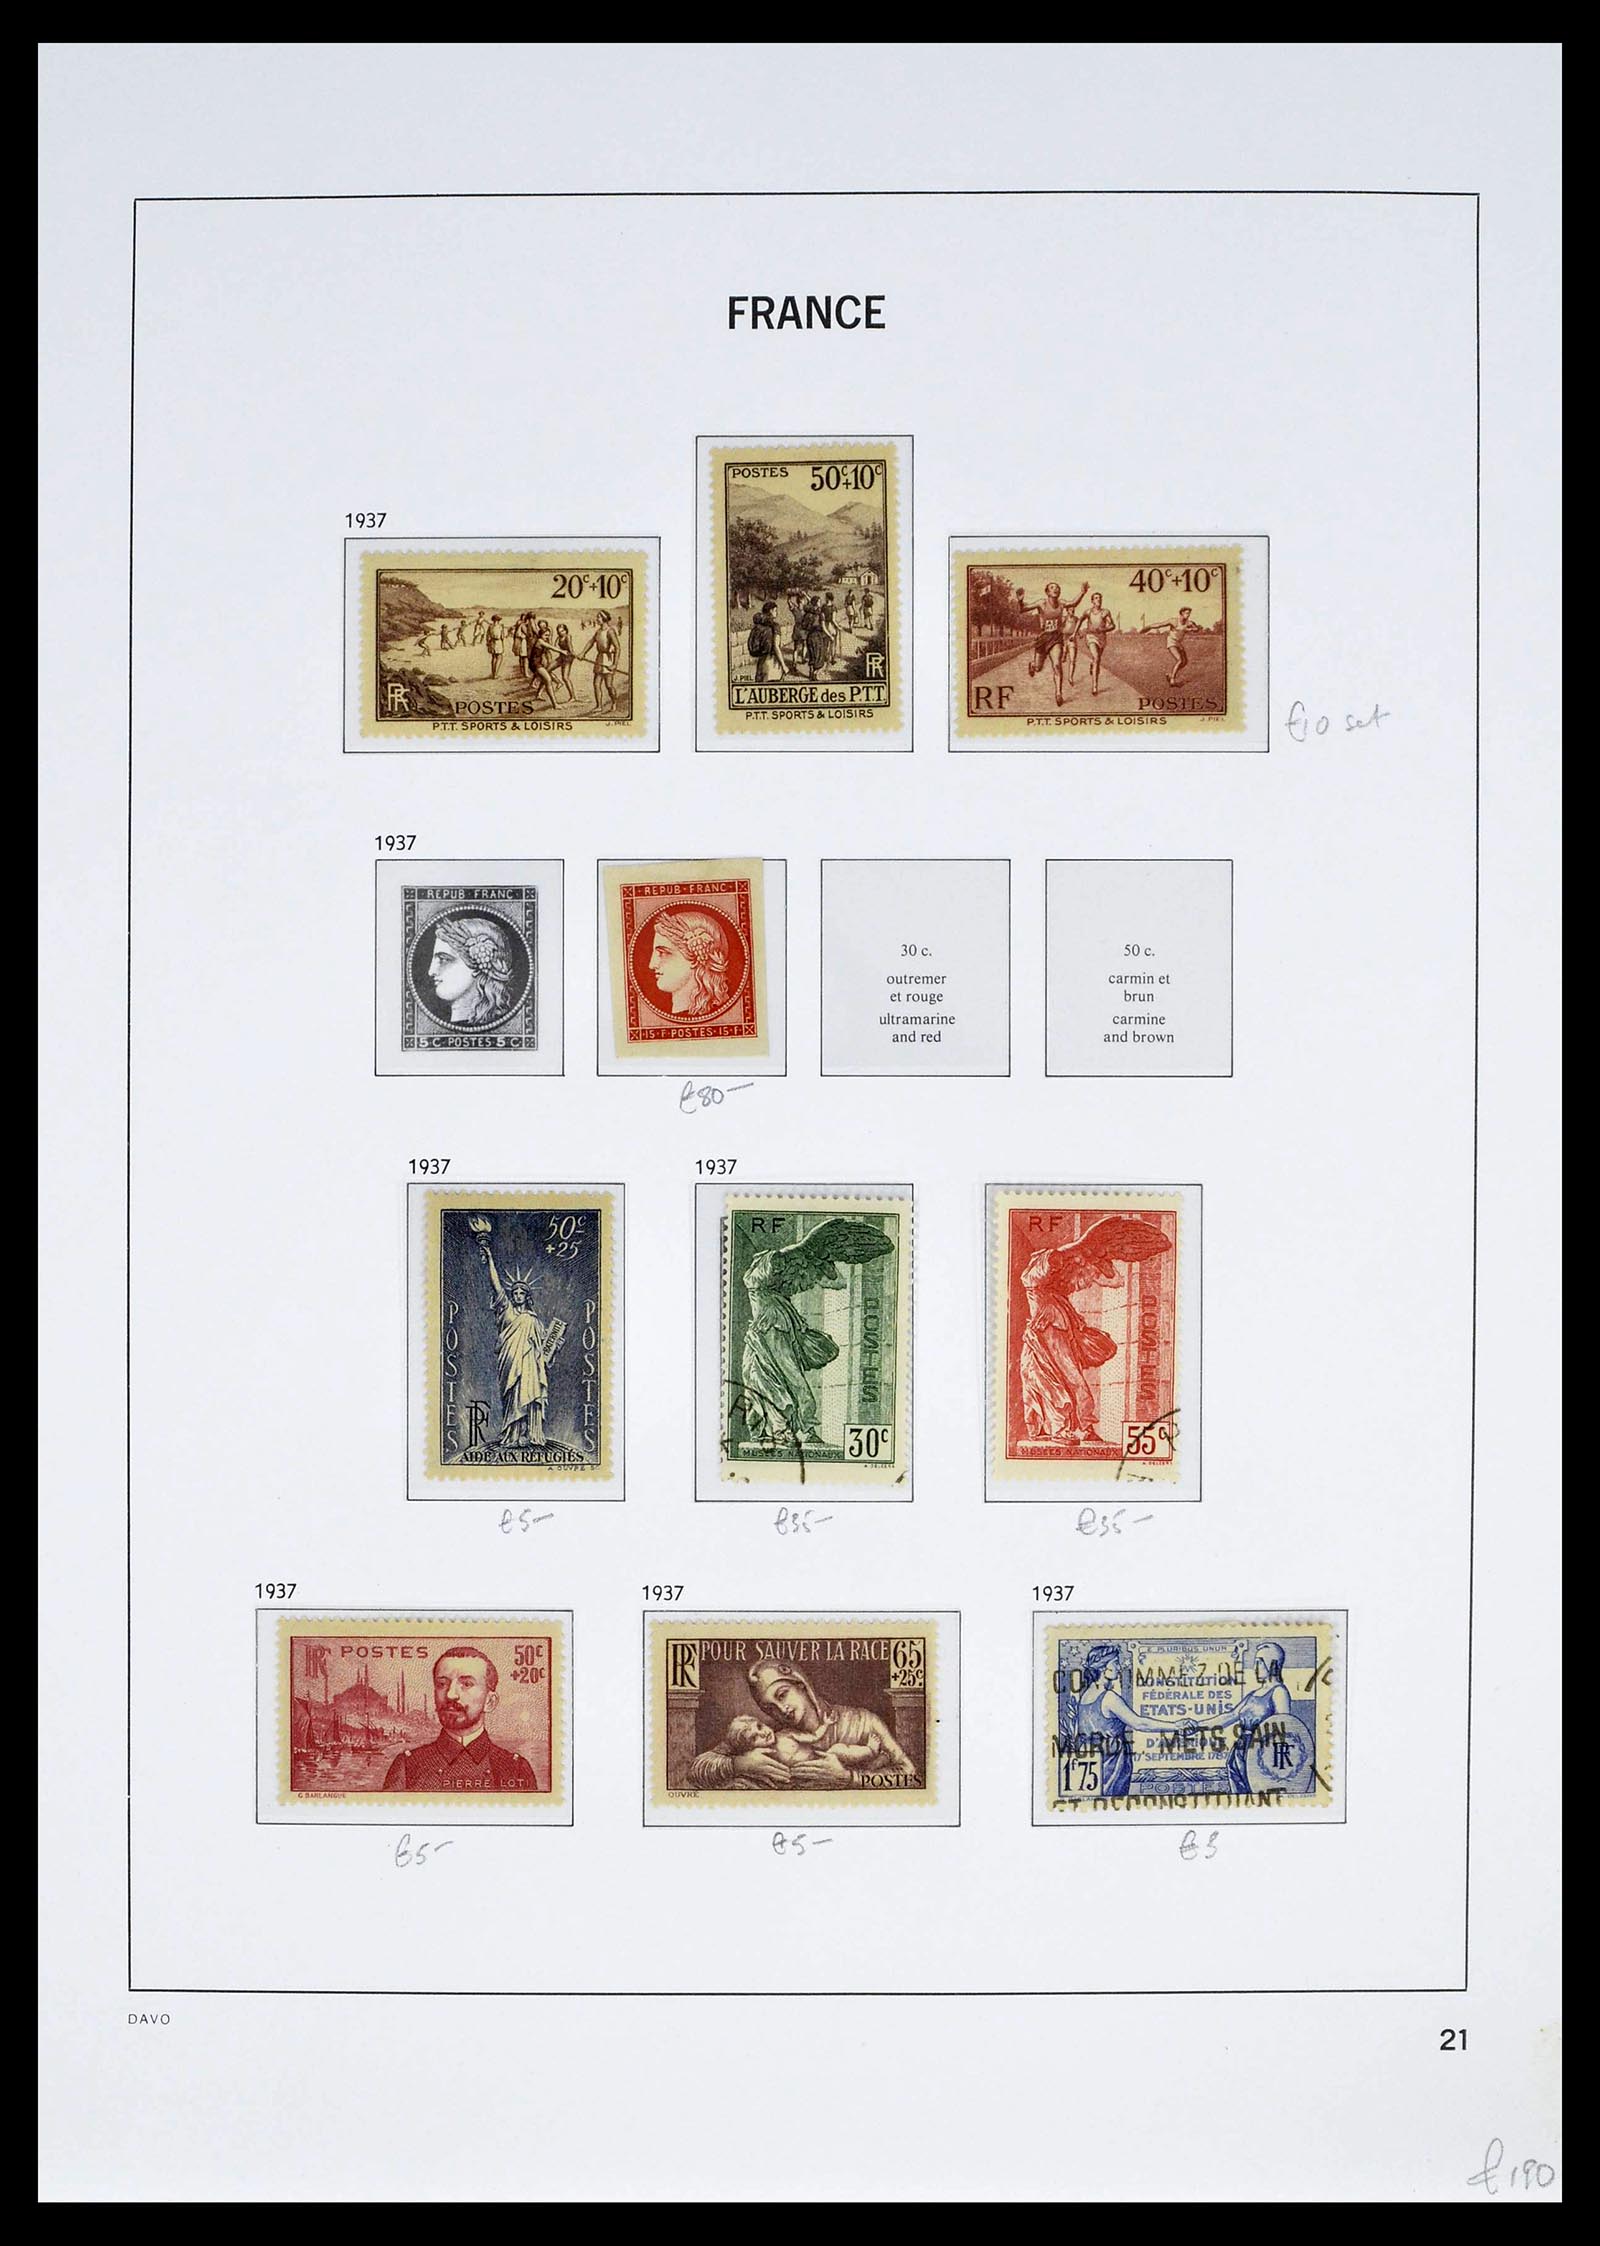 39335 0036 - Stamp collection 39335 France 1849-1969.